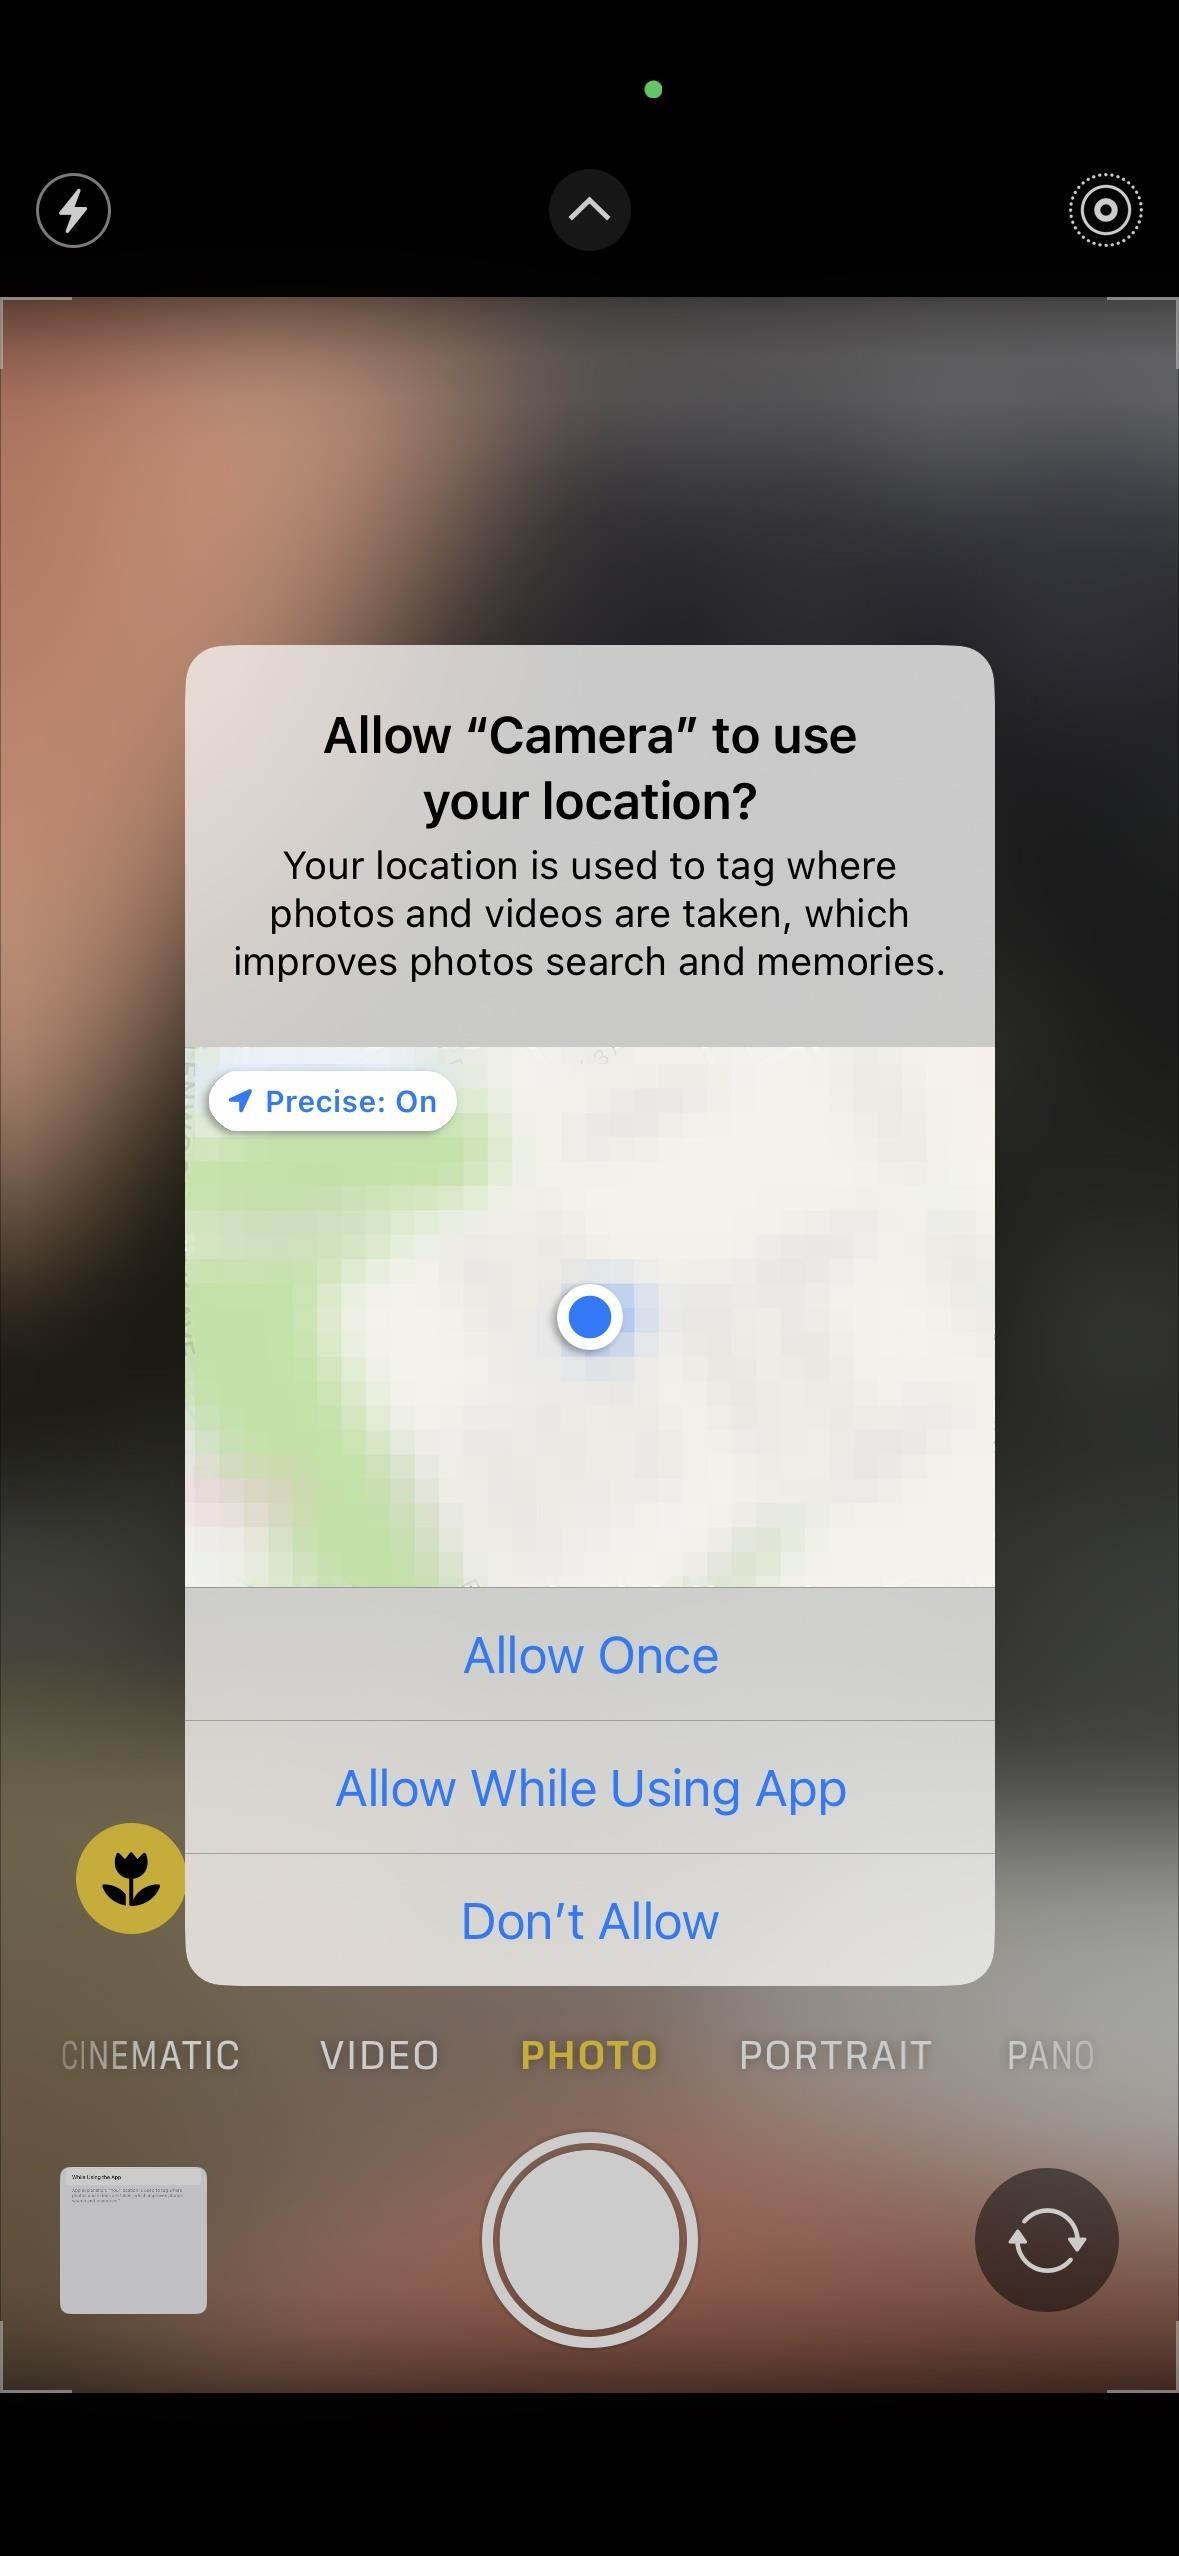 It's Easy to Falsify Photo Geotags on Your iPhone to Keep Real Locations Secret